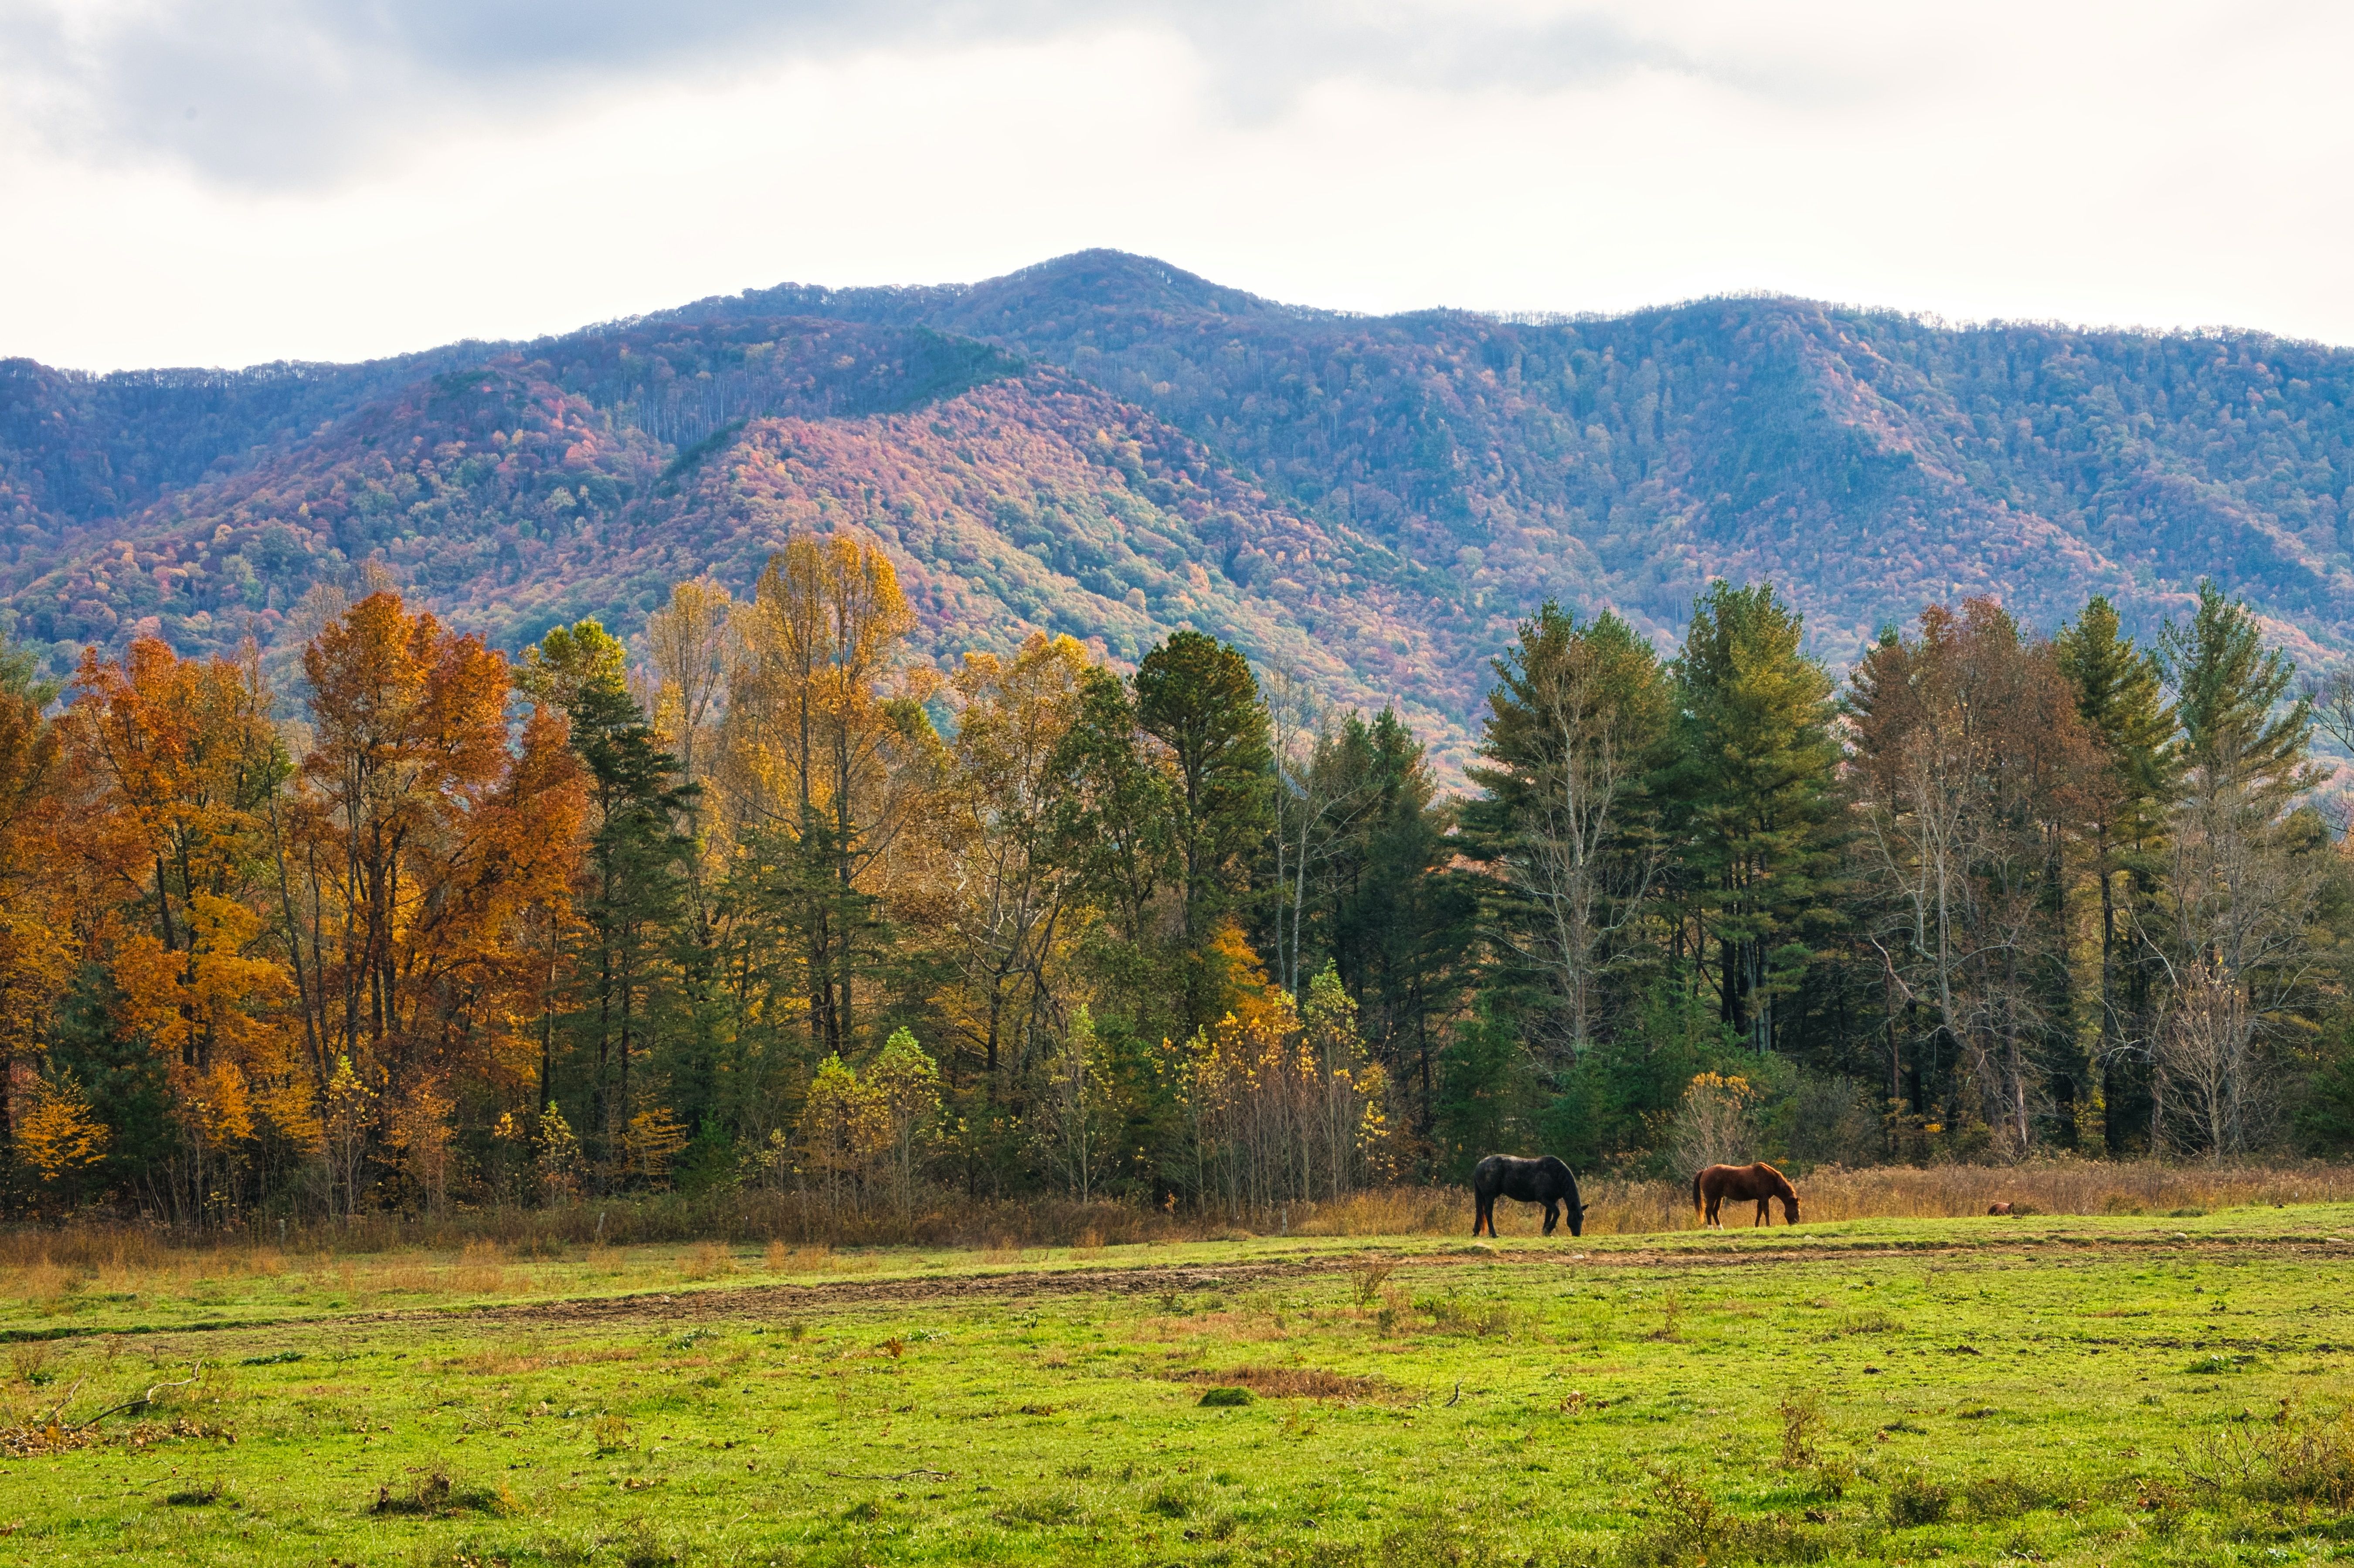 Horse grazing in a field in Great Smoky Mountains National Park, United States